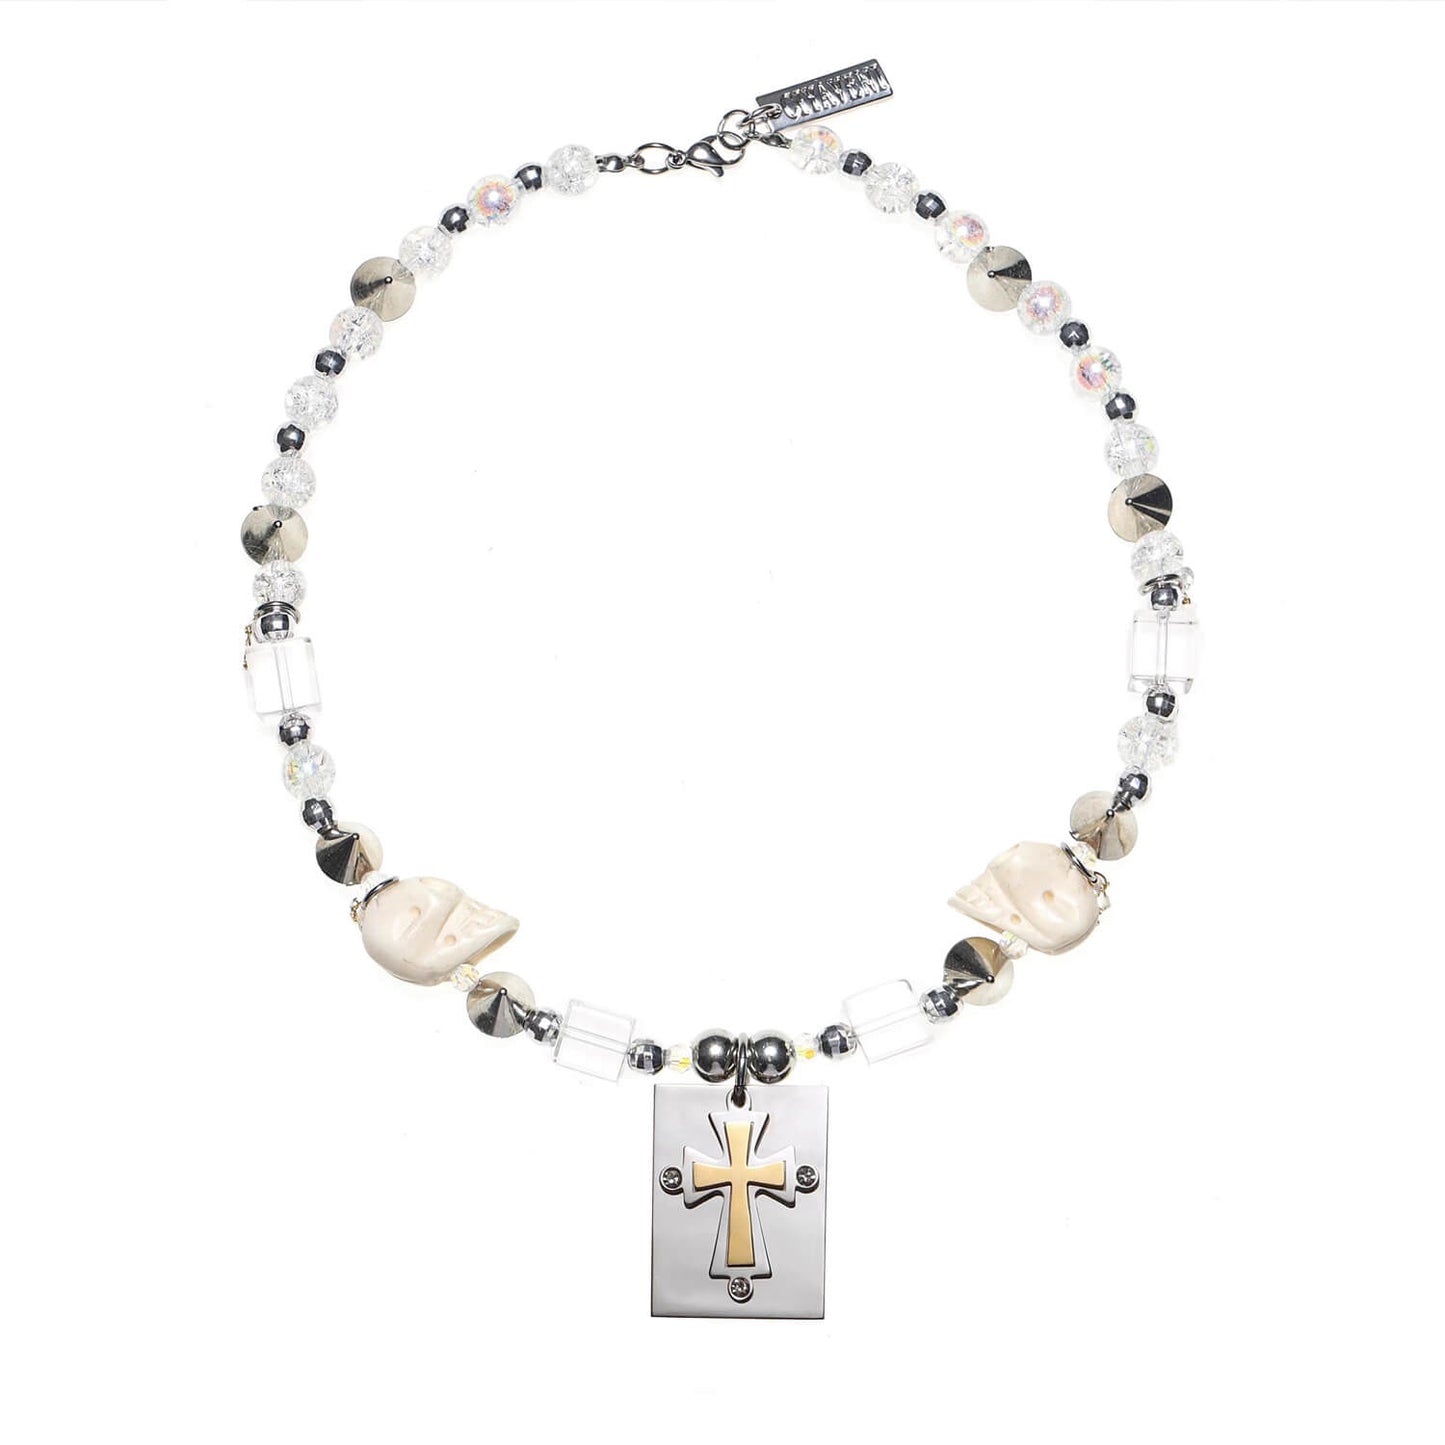 Beige Skull Riveted Cross Necklace | Buy at Khanie